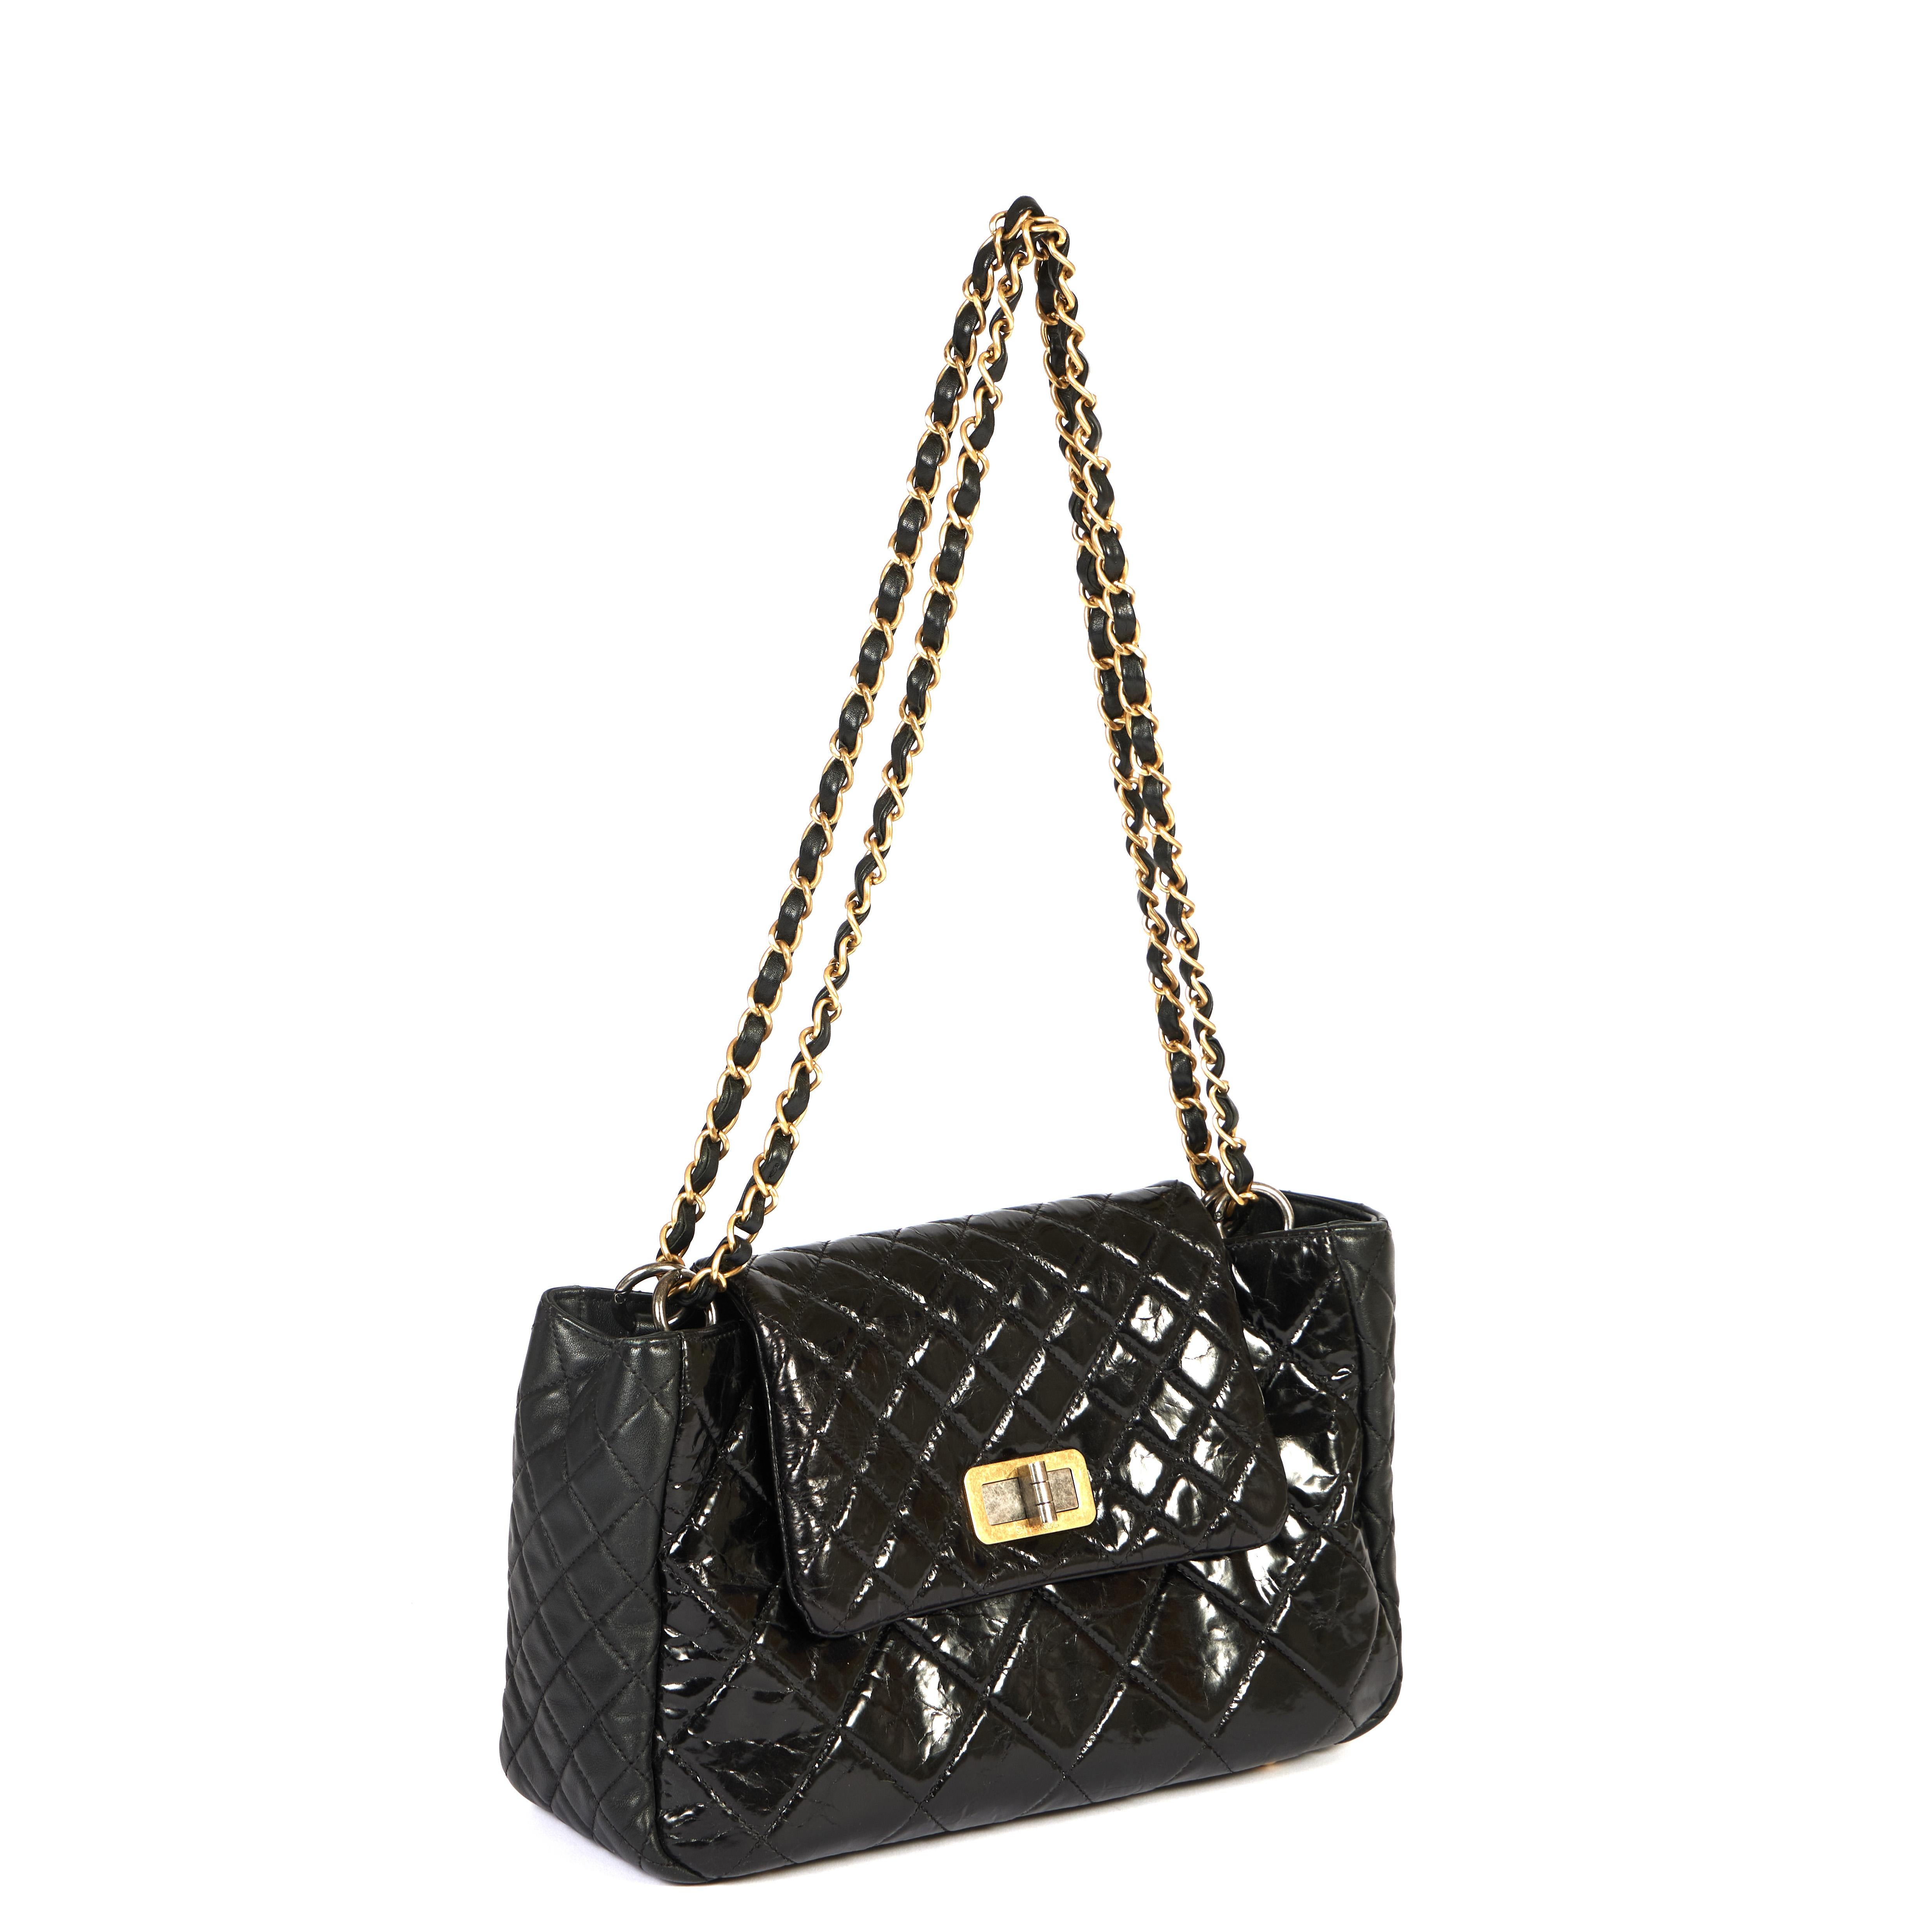 This reissue collection shoulder bag from Chanel comes in classic patent black with a golden chain. Mix of gold and ruthenium hardware. The shoulder drop is 12 inches and the bag can easily be worn cross body as well. According to the hologram